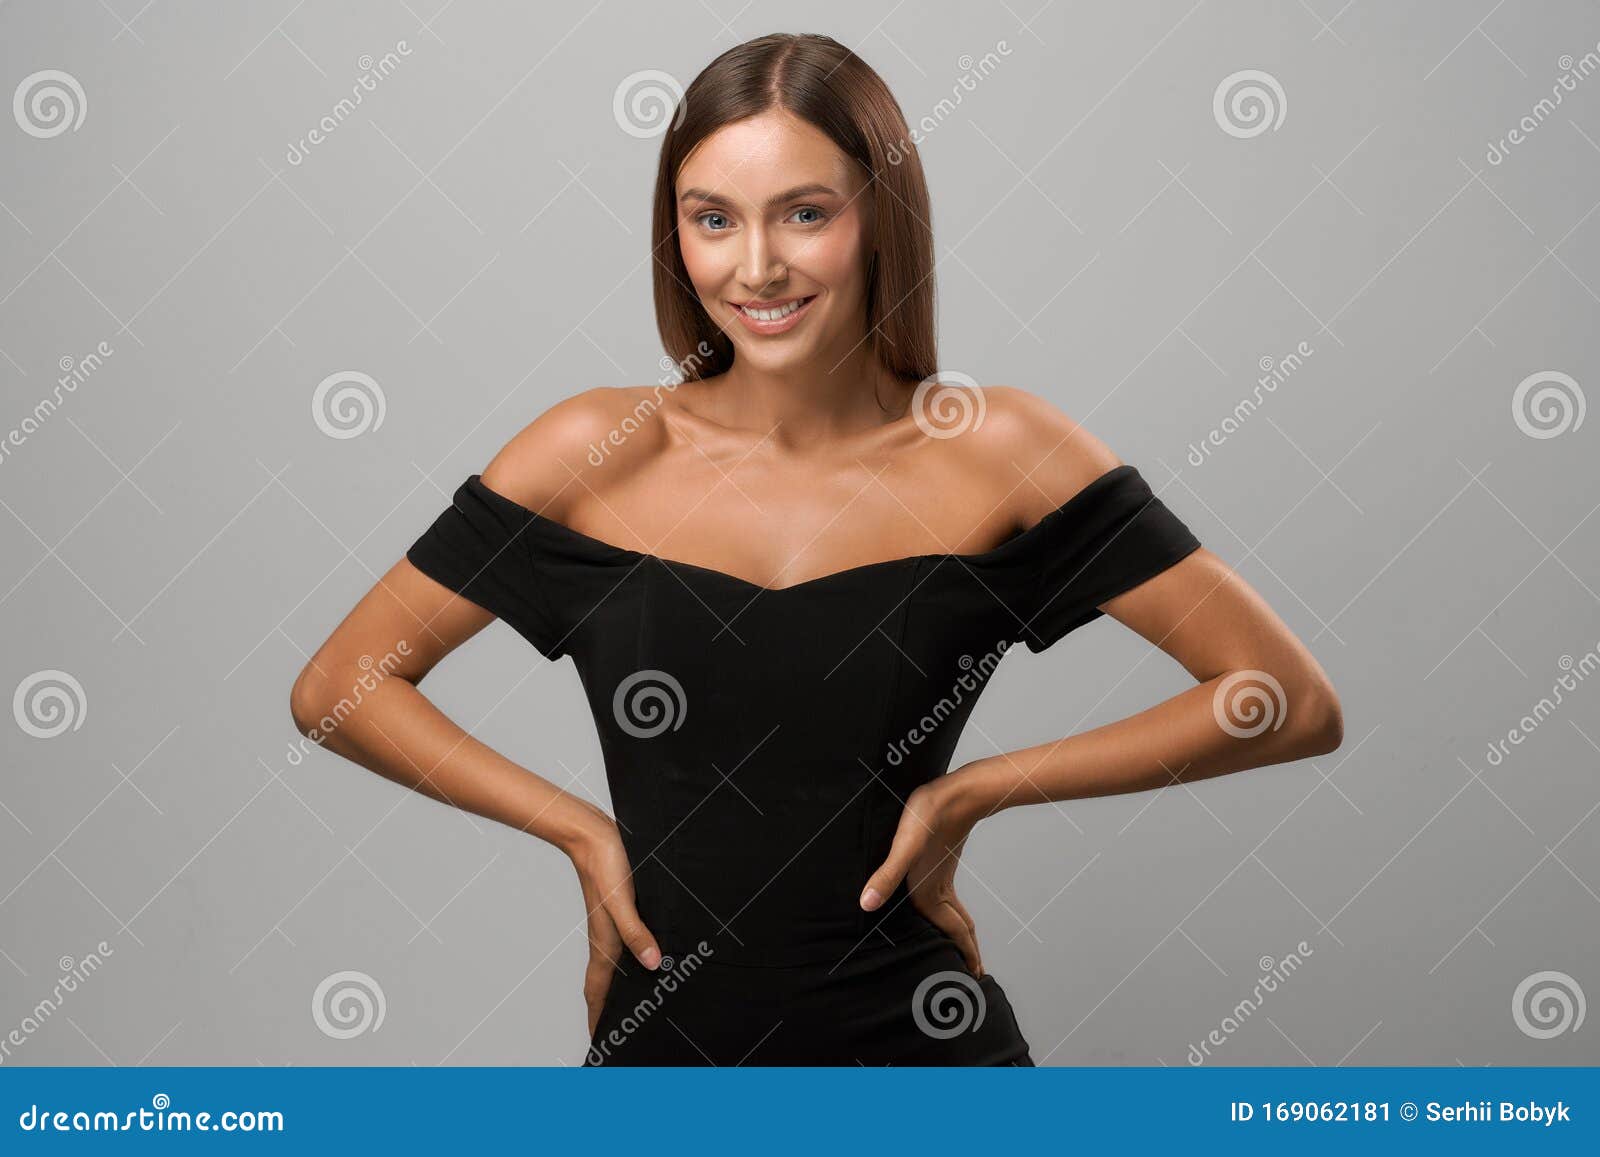 Smiling Girl With Hands On Waist Stock Image Image Of Photoshoot